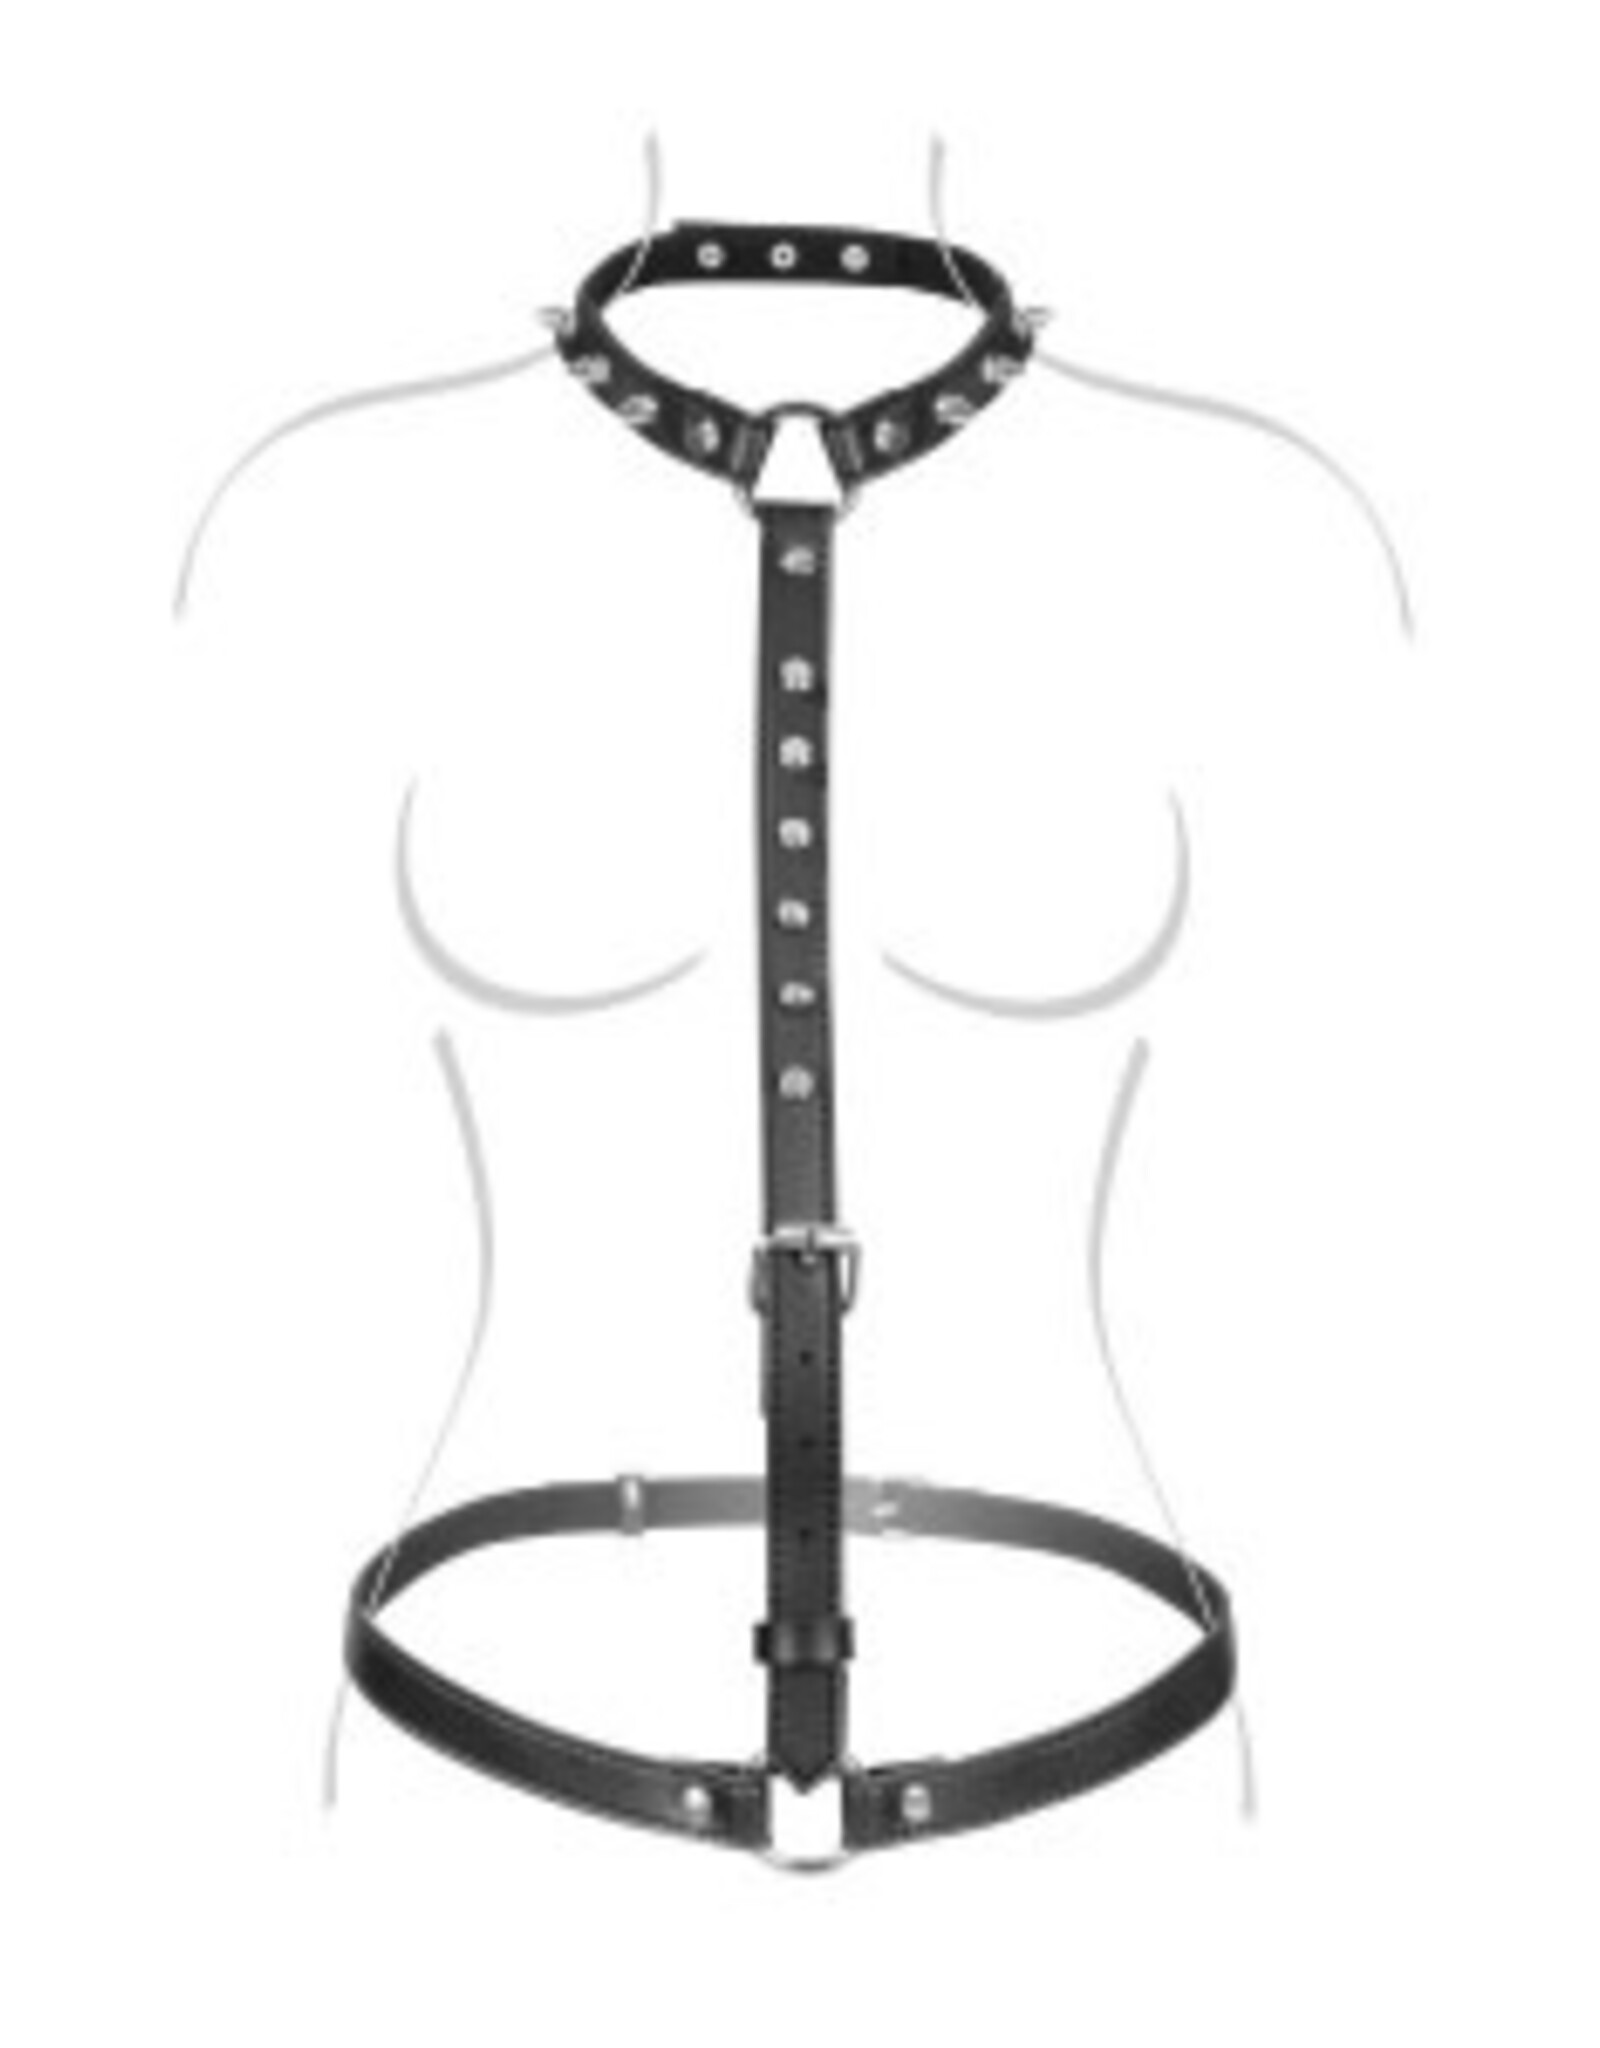 Spiked Bust Harness